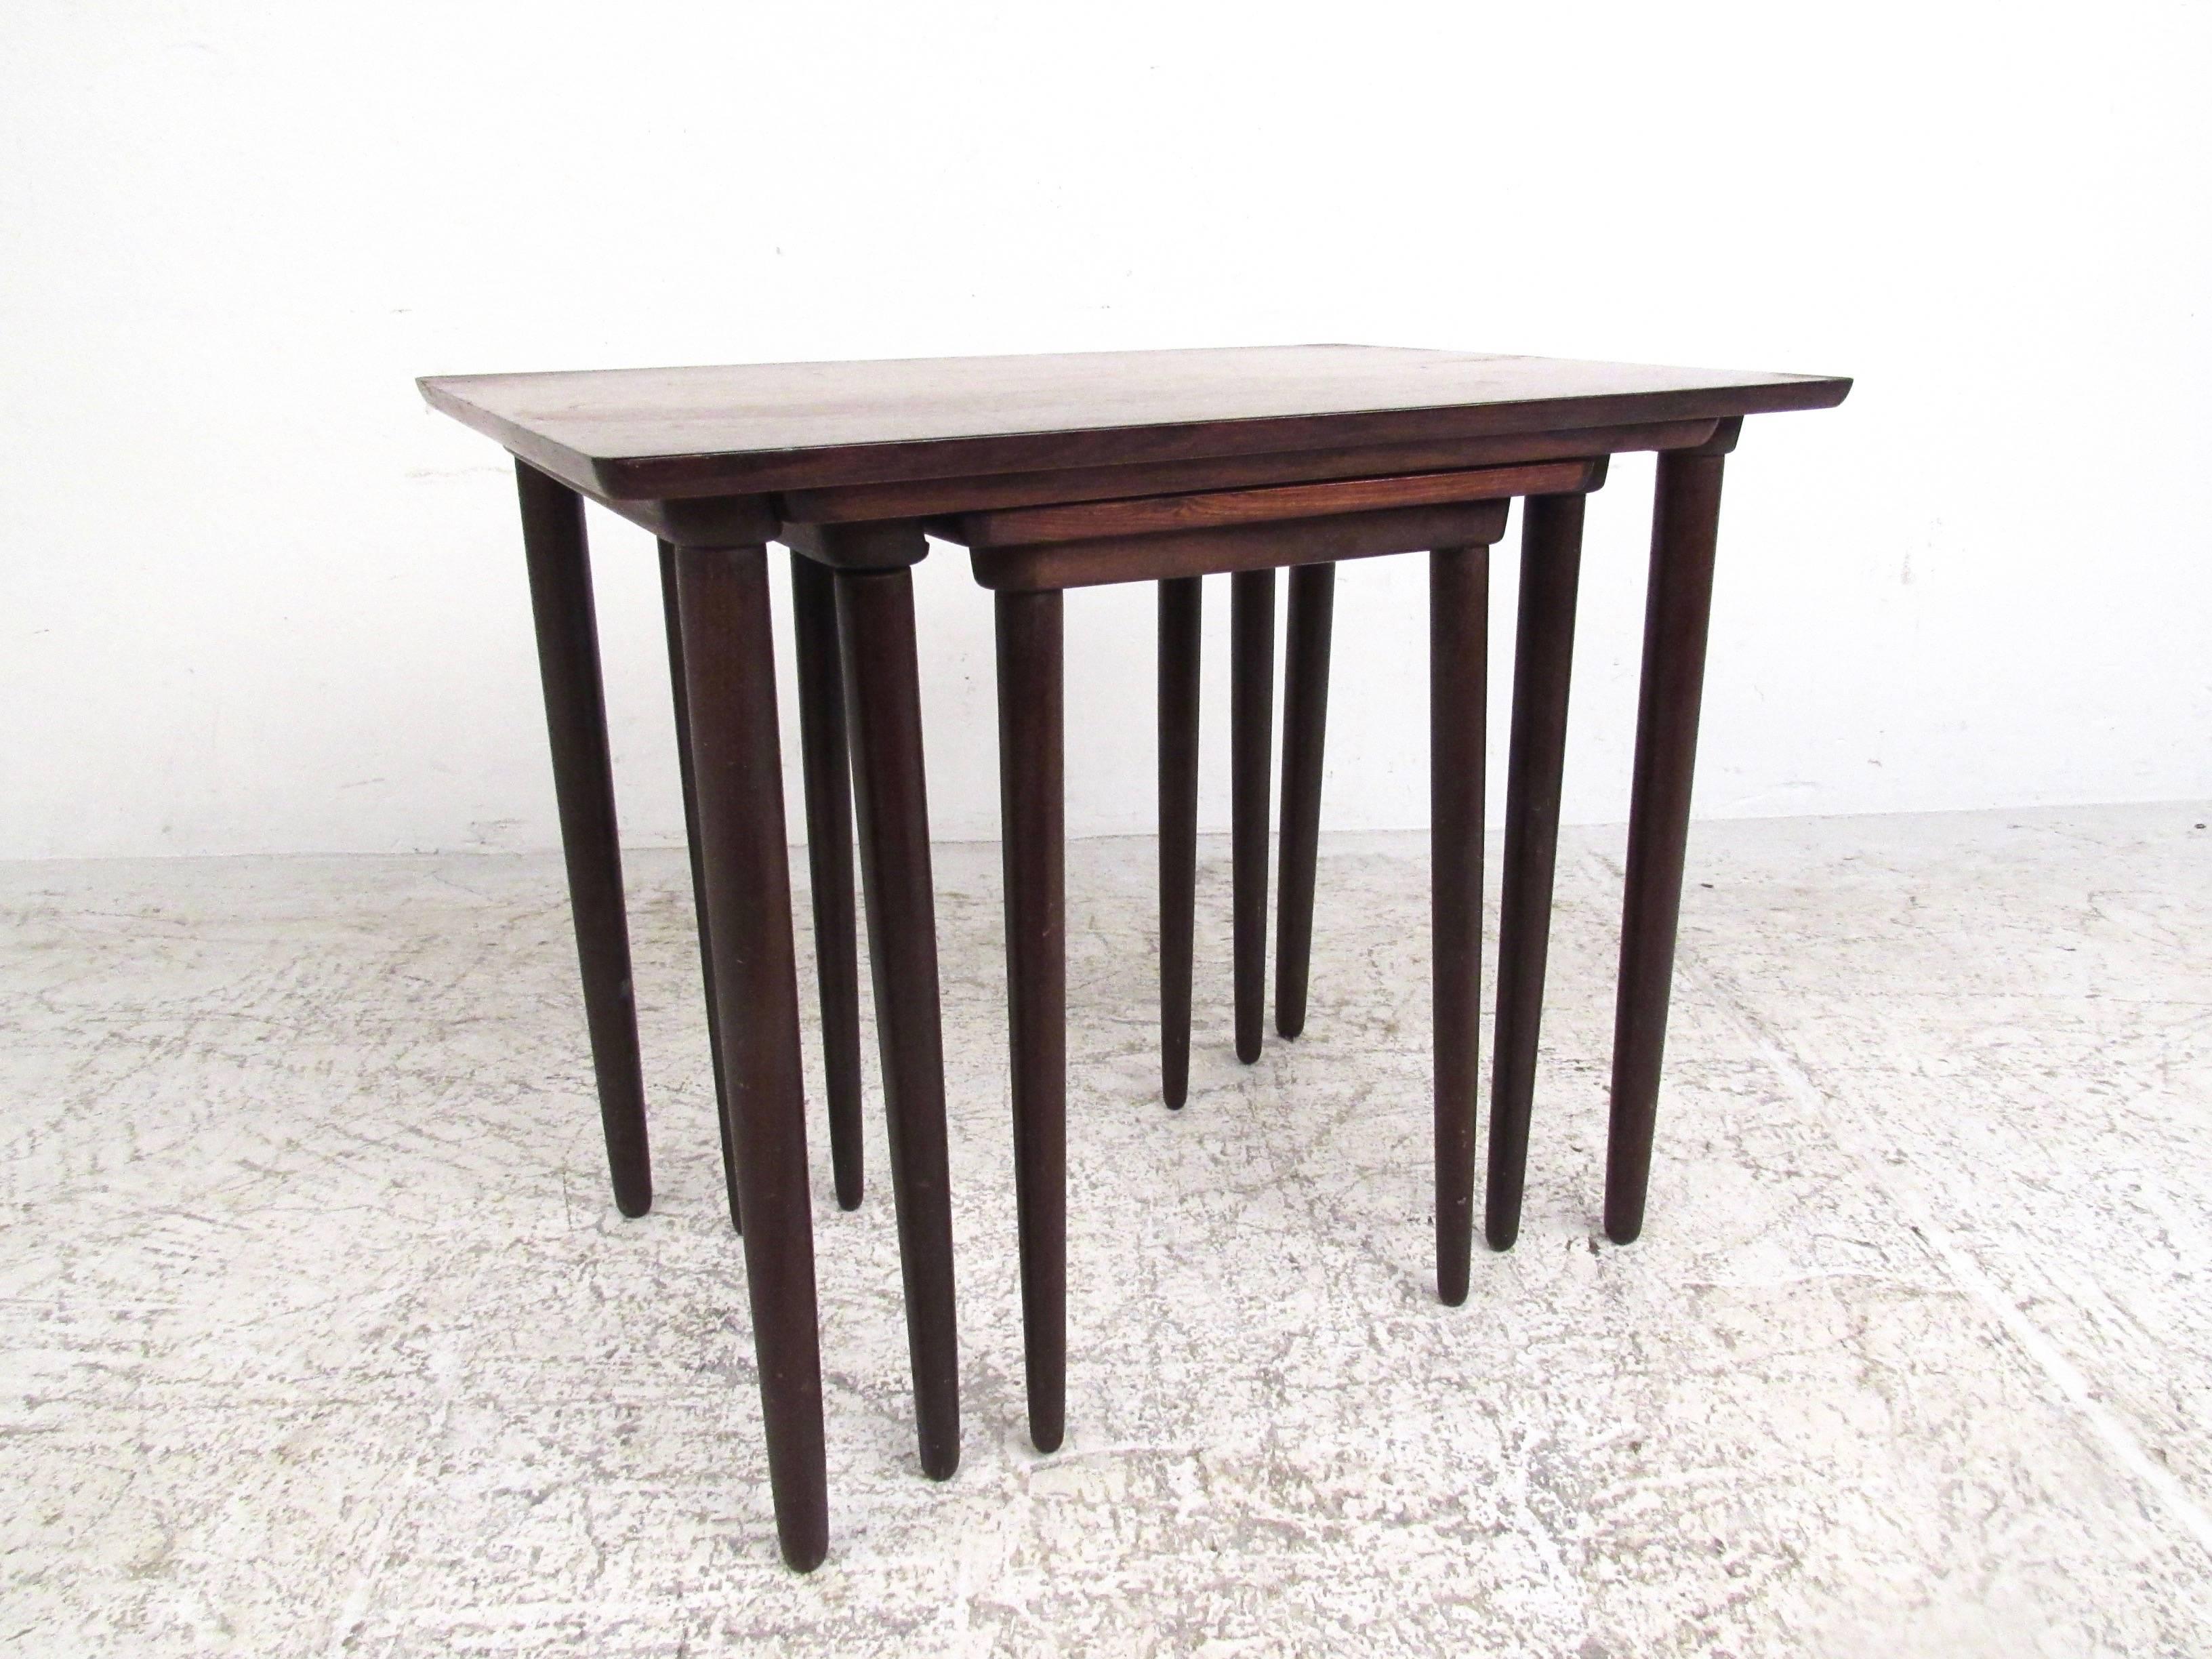 This set of three elegant vintage nesting tables features rich Mid-Century rosewood finish, tall tapered legs, and stylish lines. Manufactured by Bramin in Denmark, circa 1960s, this beautiful set makes a versatile addition to home or office. Please